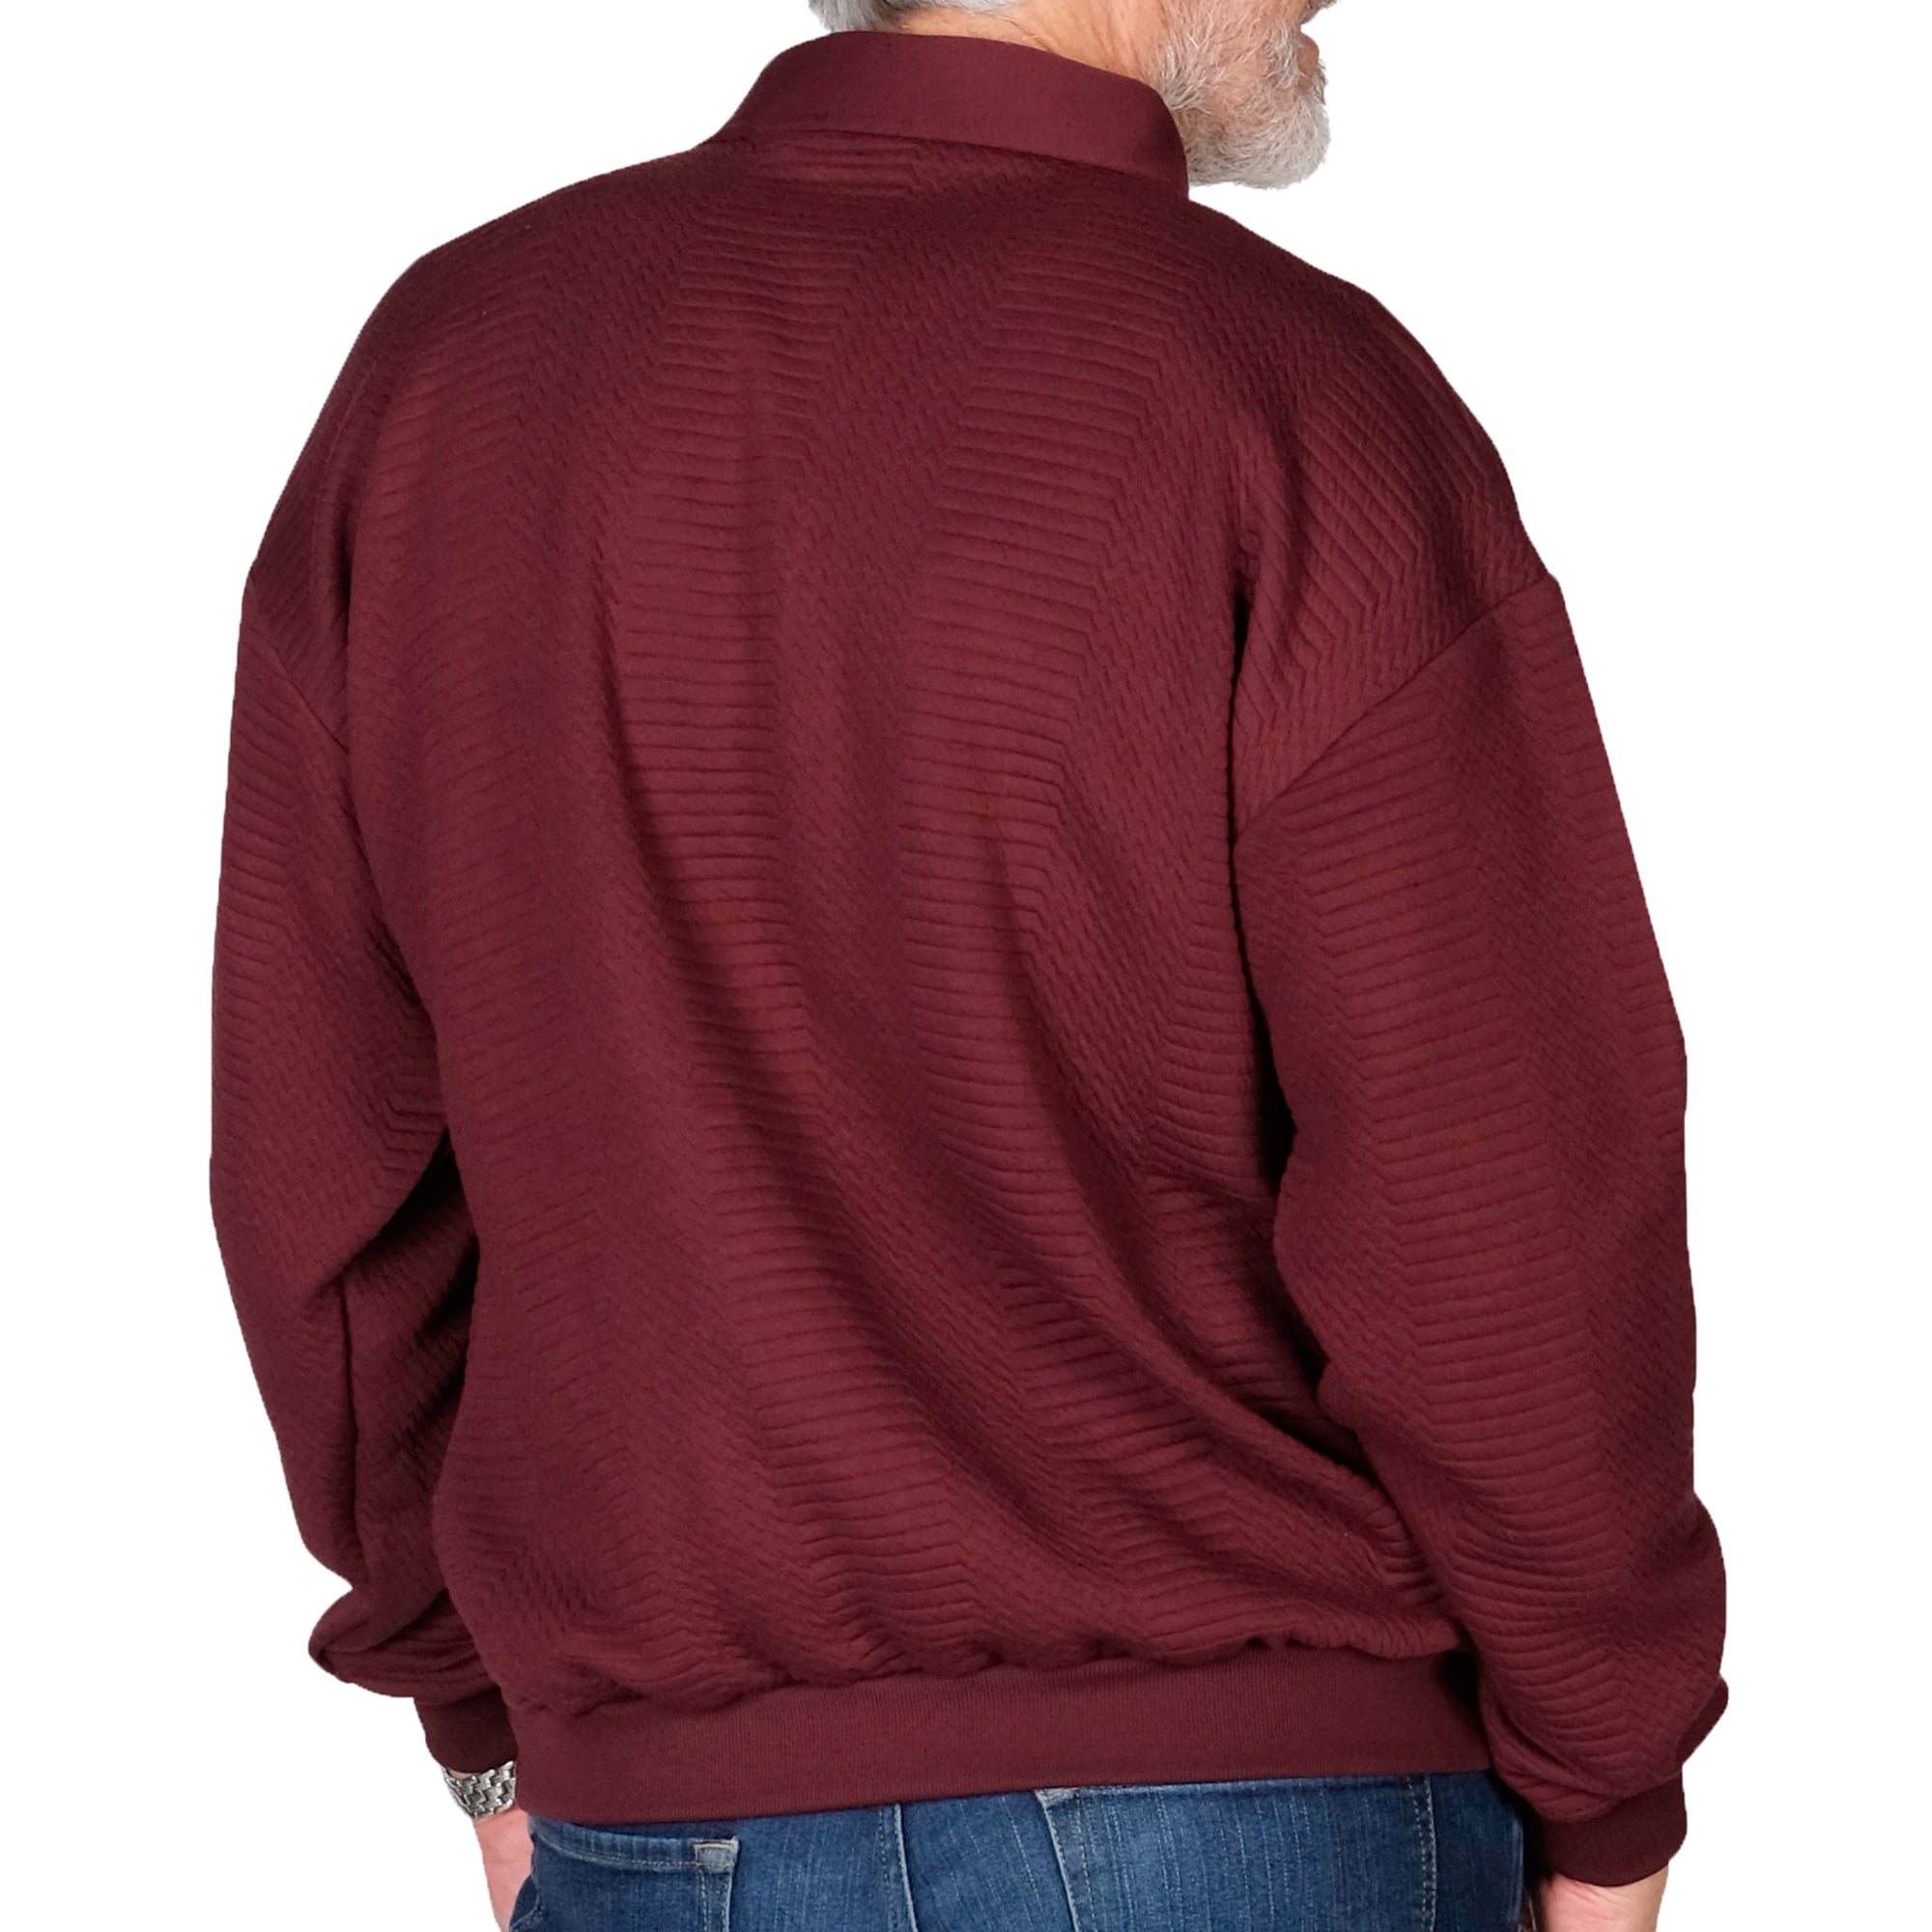 LD Sport Solid Textured Long Sleeve Banded Bottom Shirt - 6094-950 - Burgundy - Big and Tall